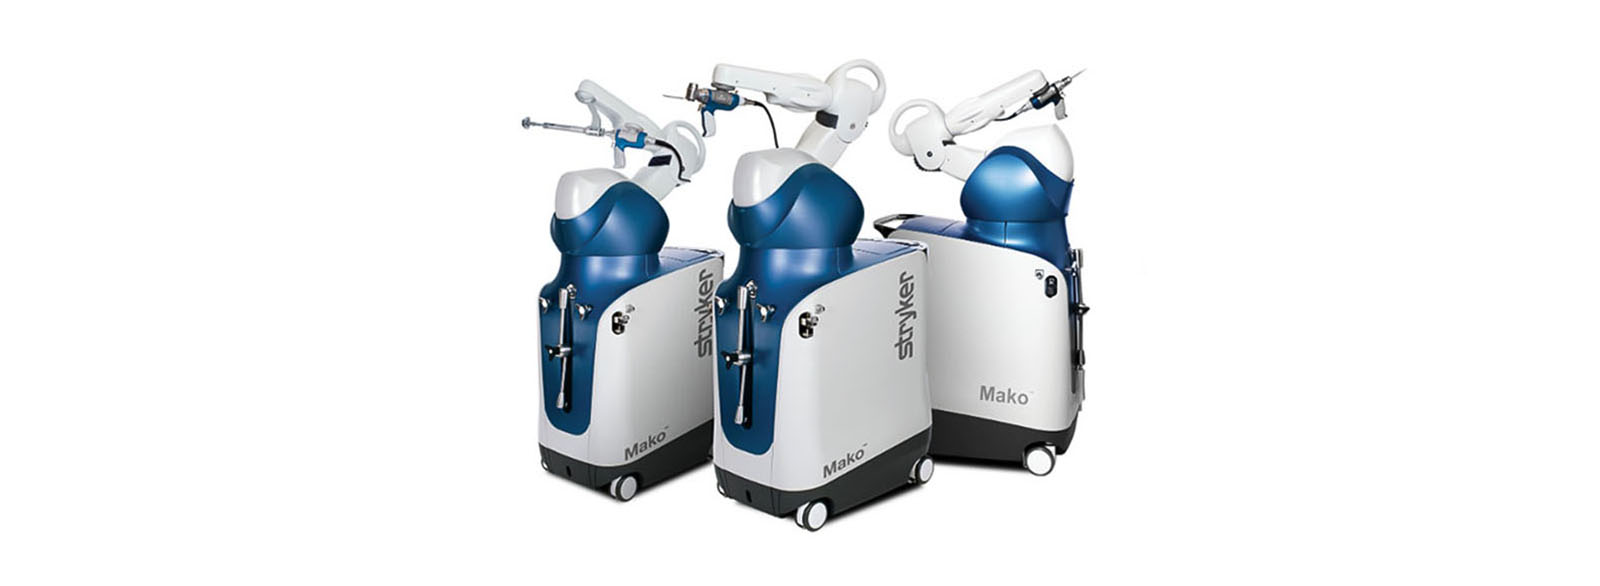 Mako and Stryker robotic orthopedic surgery devices for total knee replacement and robotic hip surgery.